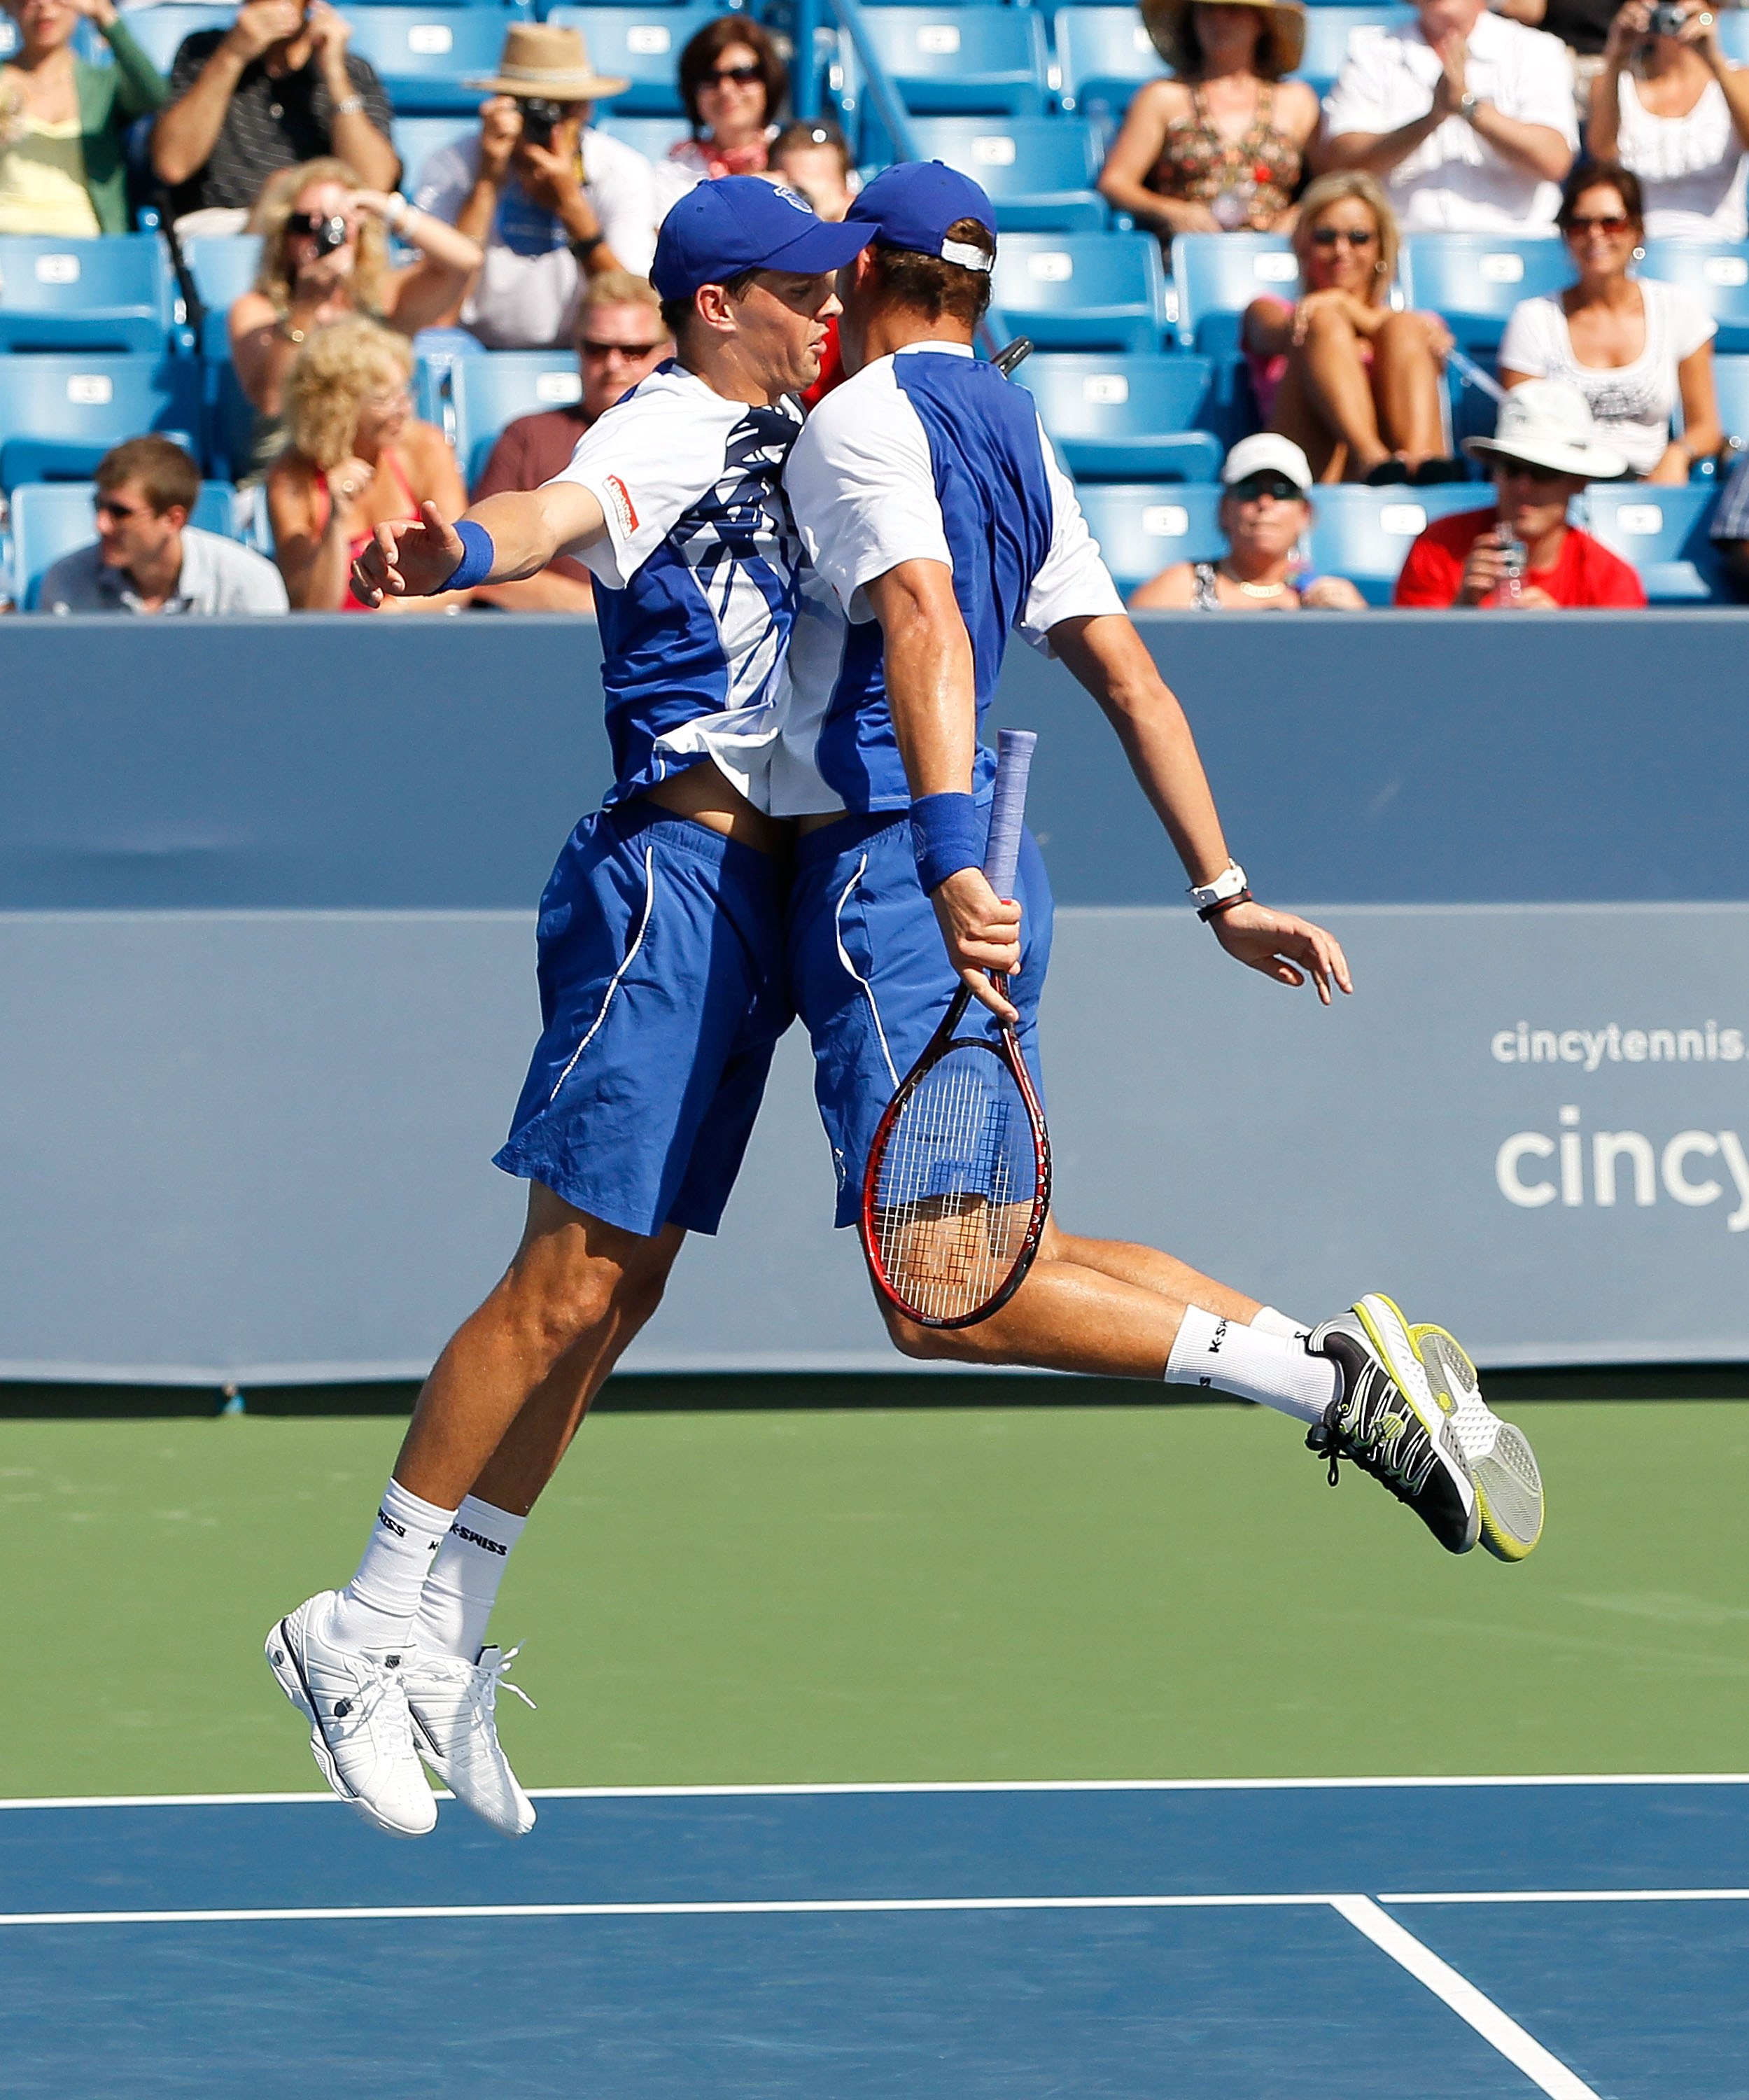 CINCINNATI - AUGUST 22:  Bob and Mike Bryan during the finals on Day 7 of the Western & Southern Financial Group Masters at the Lindner Family Tennis Center on August 22, 2010 in Cincinnati, Ohio.  (Photo by Kevin C. Cox/Getty Images)